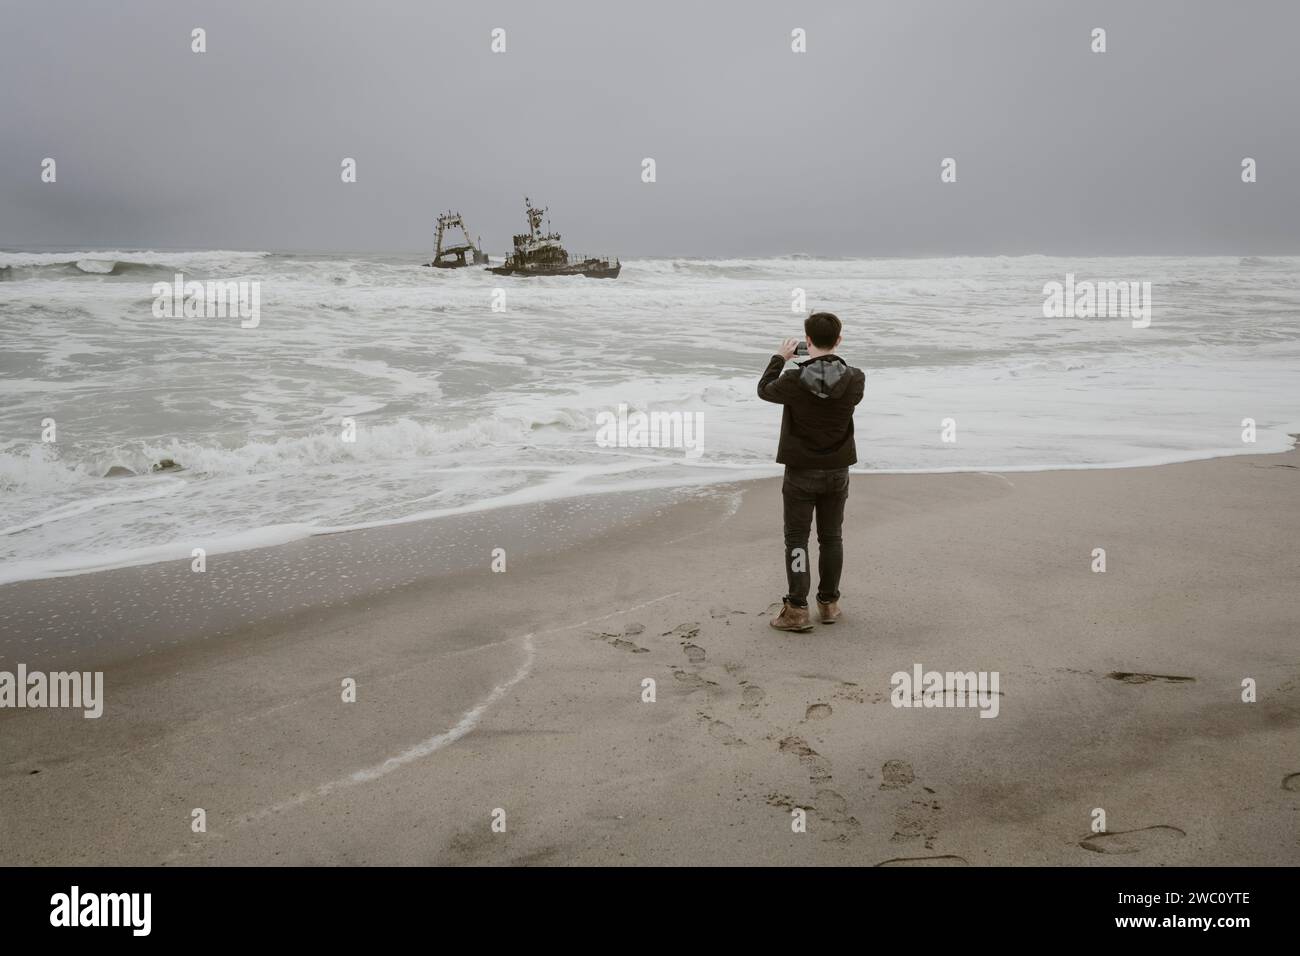 A tourist takes a picture of one of the Shipwrecks on the Skeleton Coast in Namibia Stock Photo